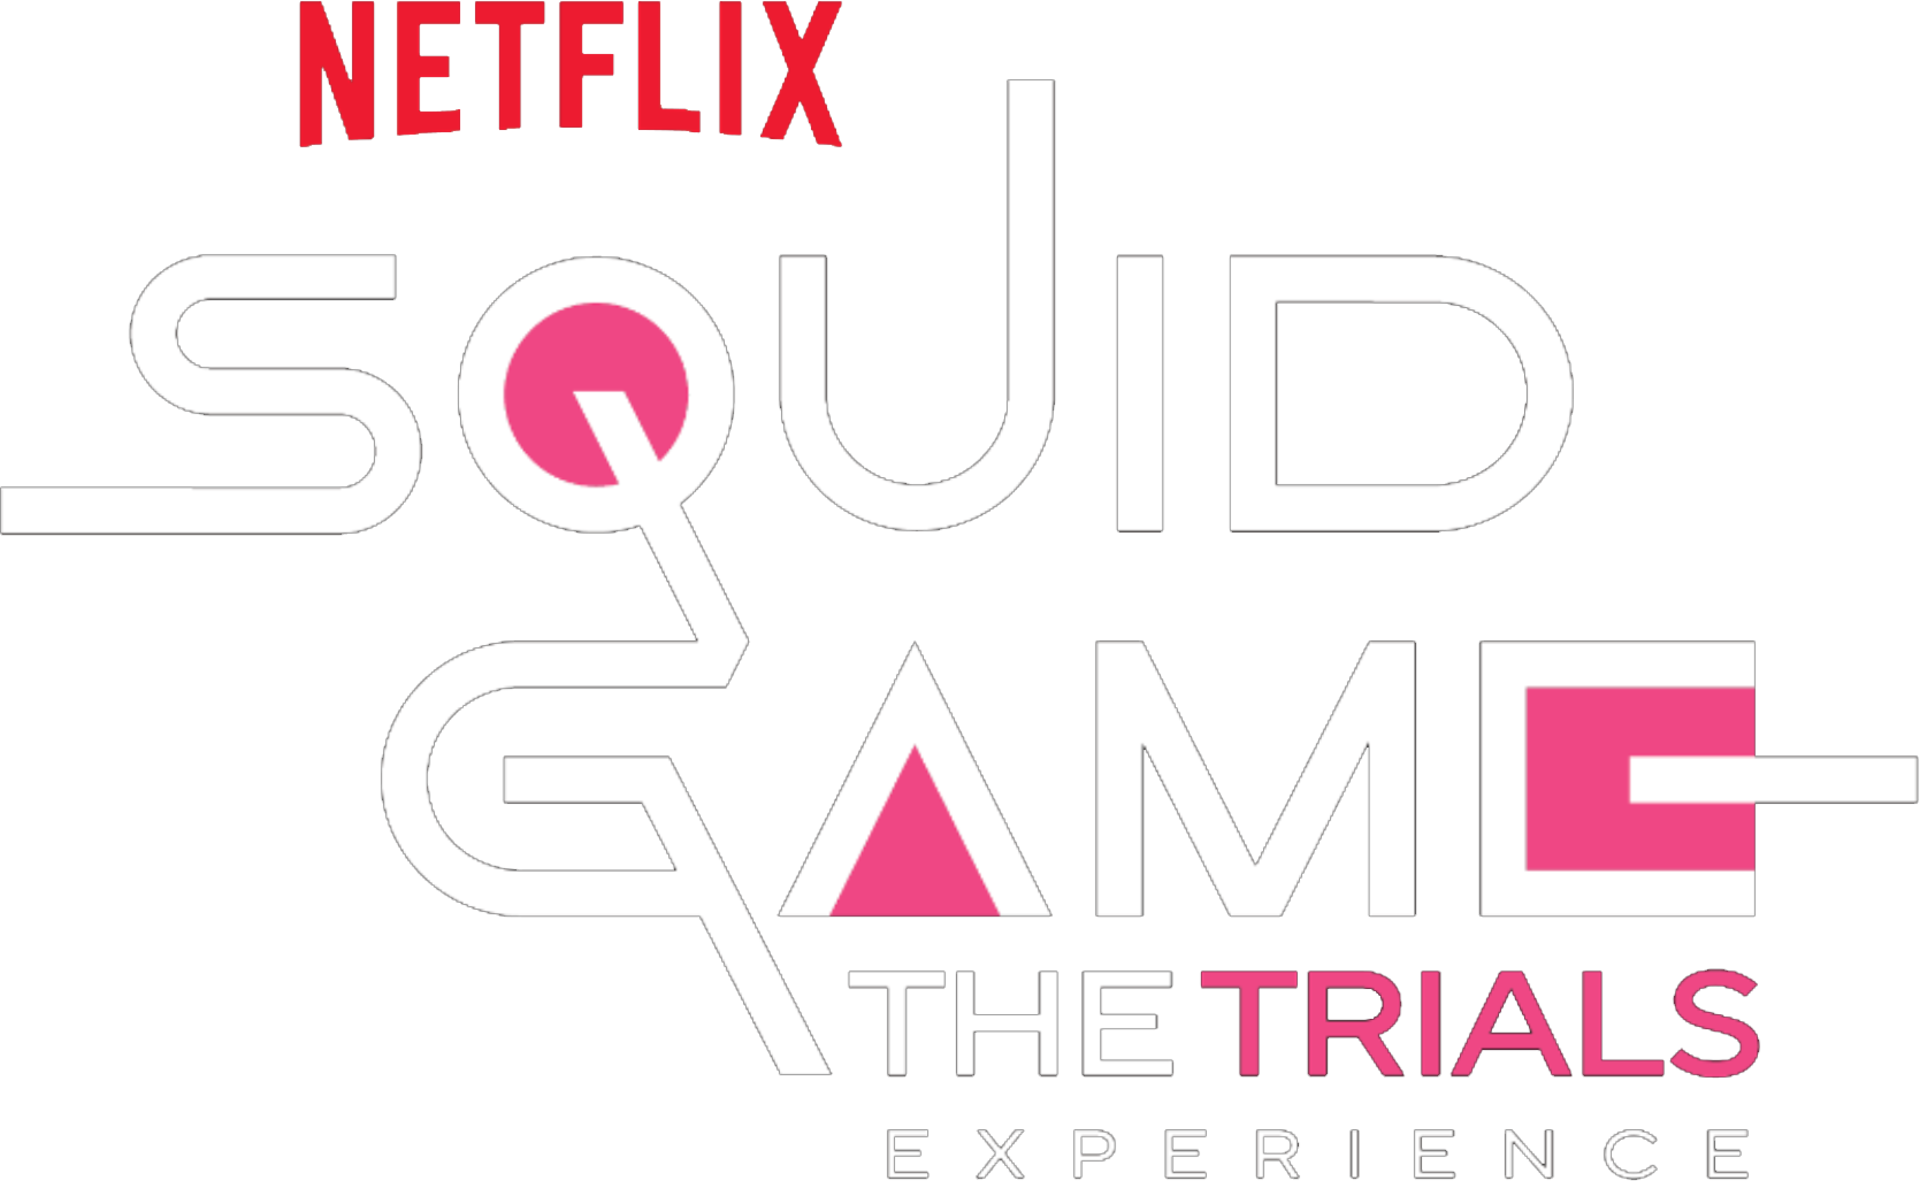 Squid Game' in real life? The IRL competition comes to L.A. - Los